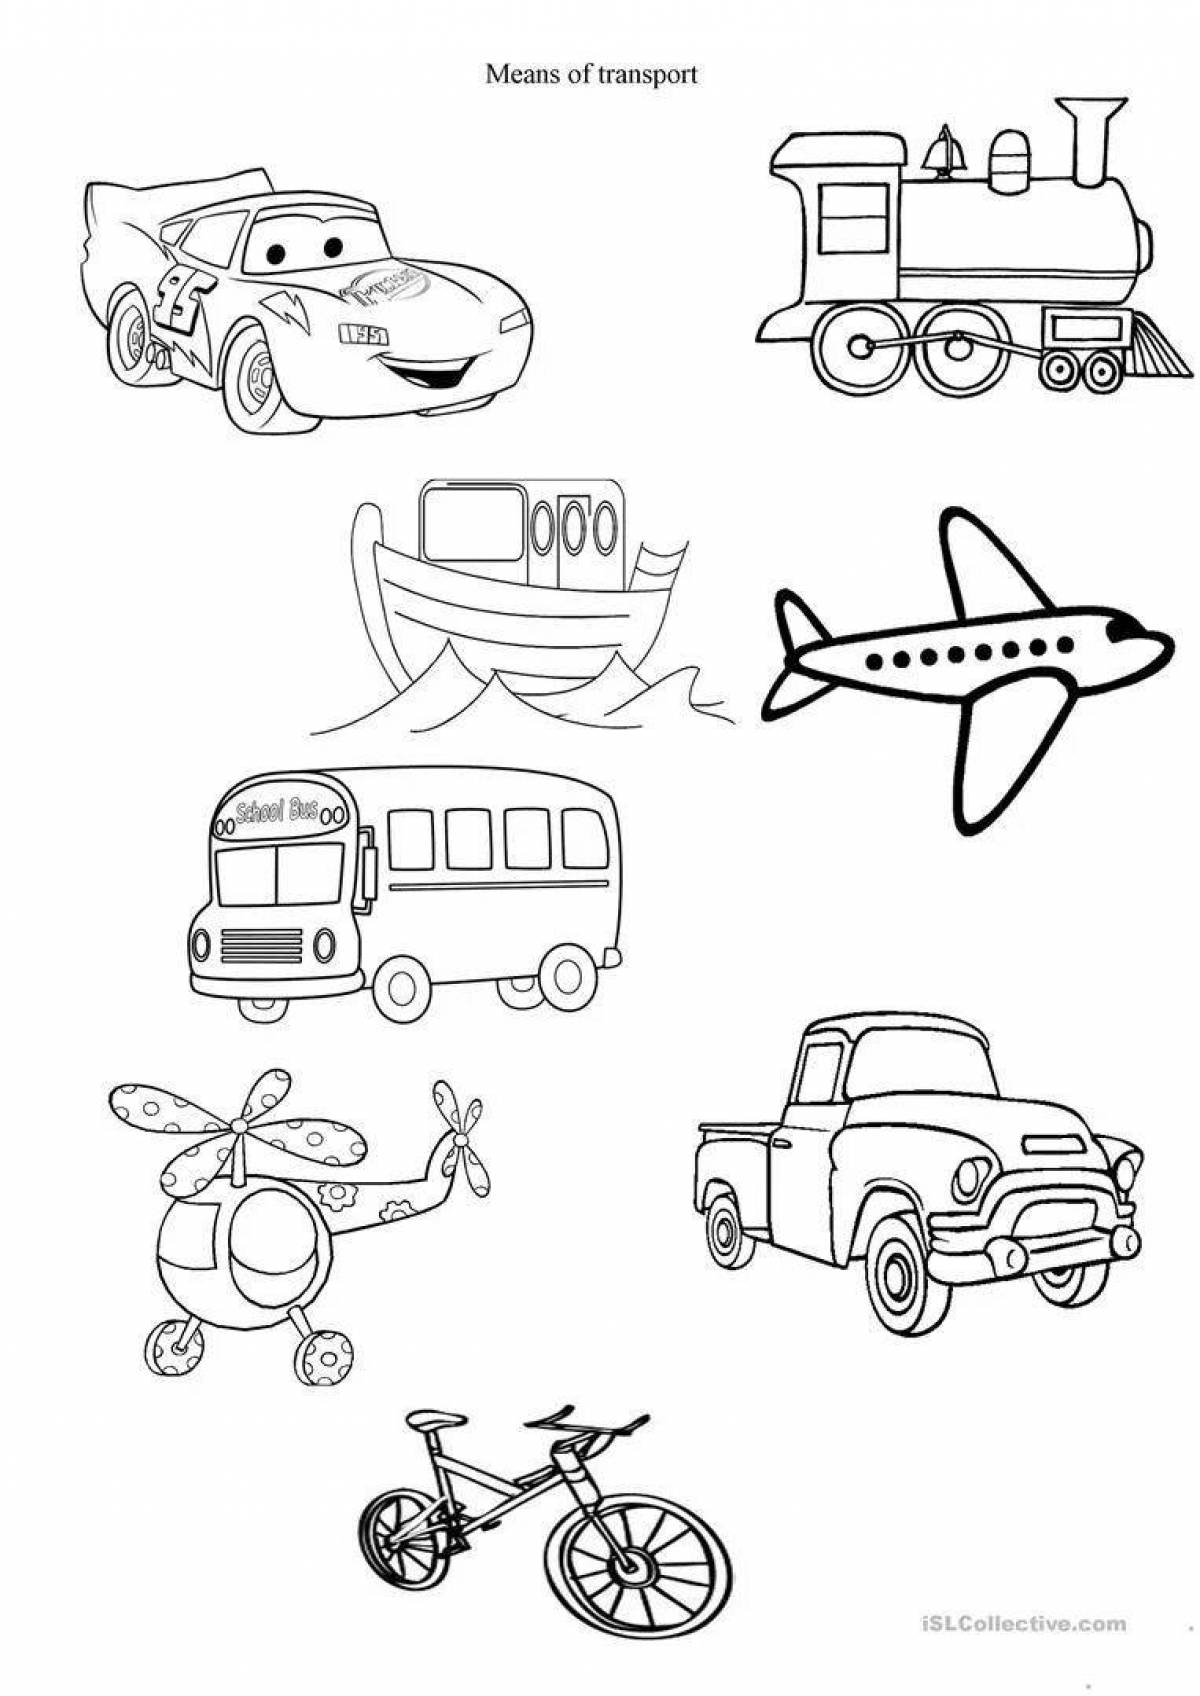 Exciting modes of transport coloring pages